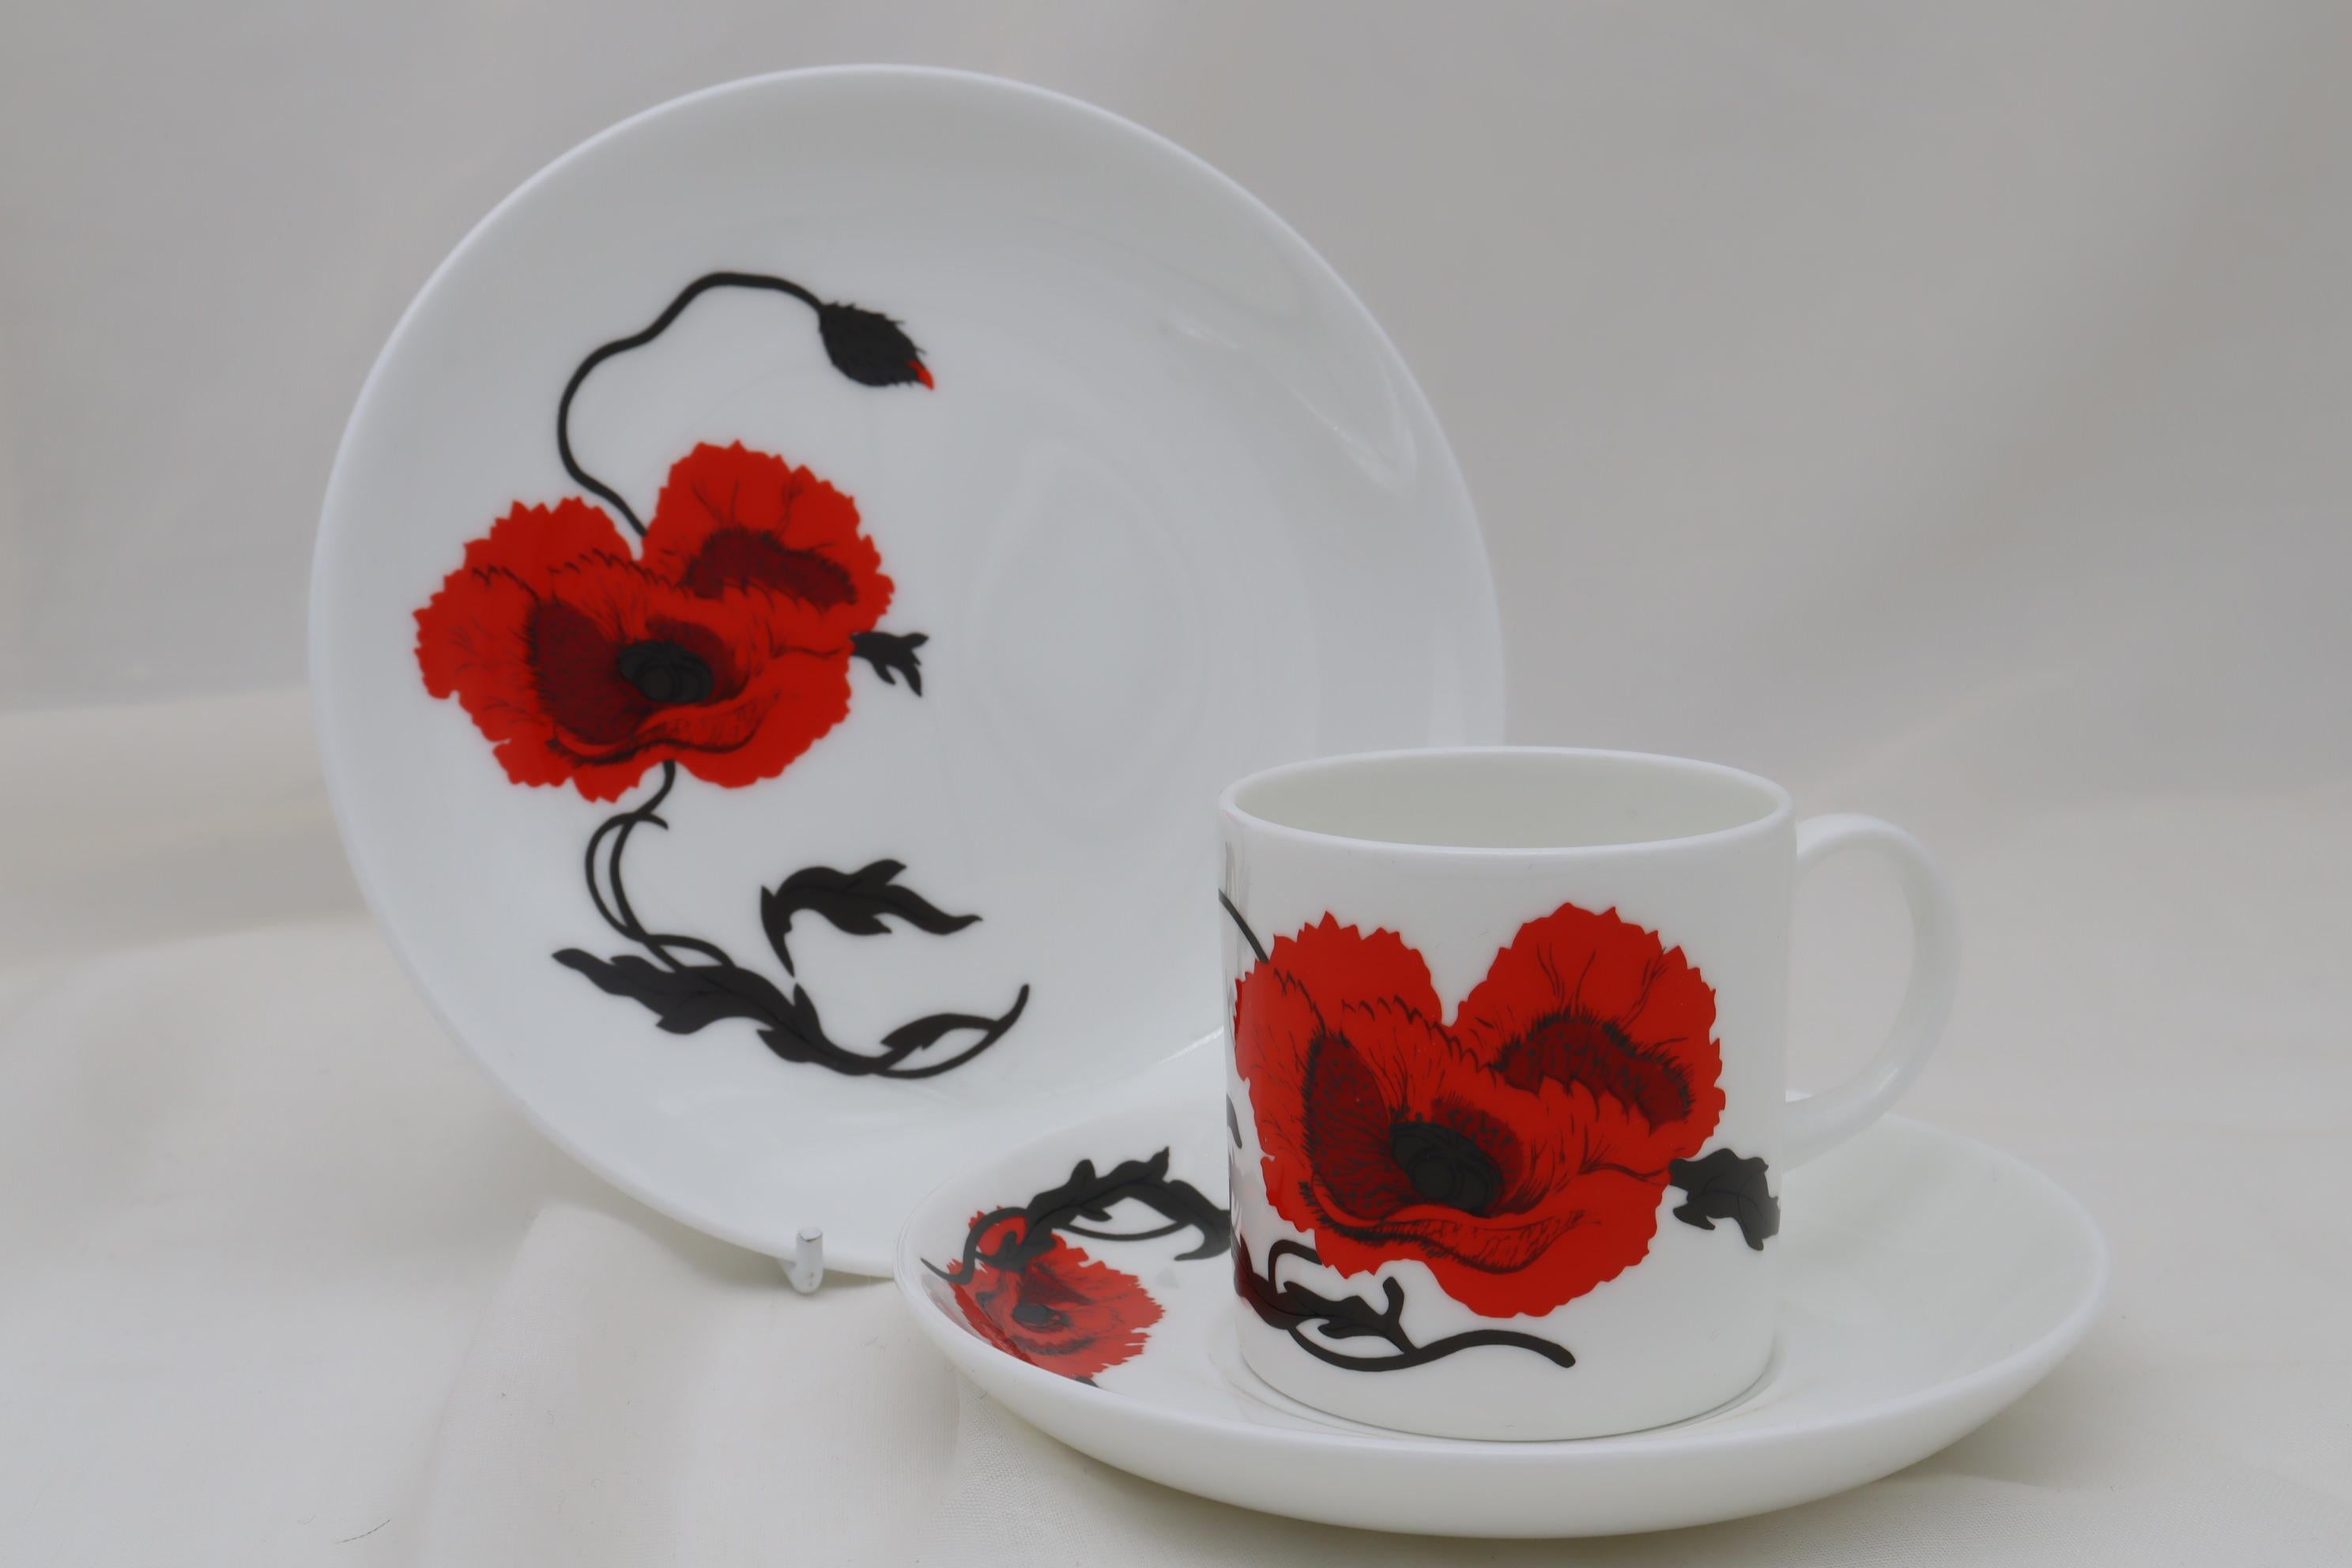 This bone china Susie Cooper coffee set is decorated with the popular Cornpoppy pattern on the Can shape. The Cornpoppy pattern (pattern C 2176) was introduced in 1971 and became one of Wedgwood's most successful lines of the late 1970's through to